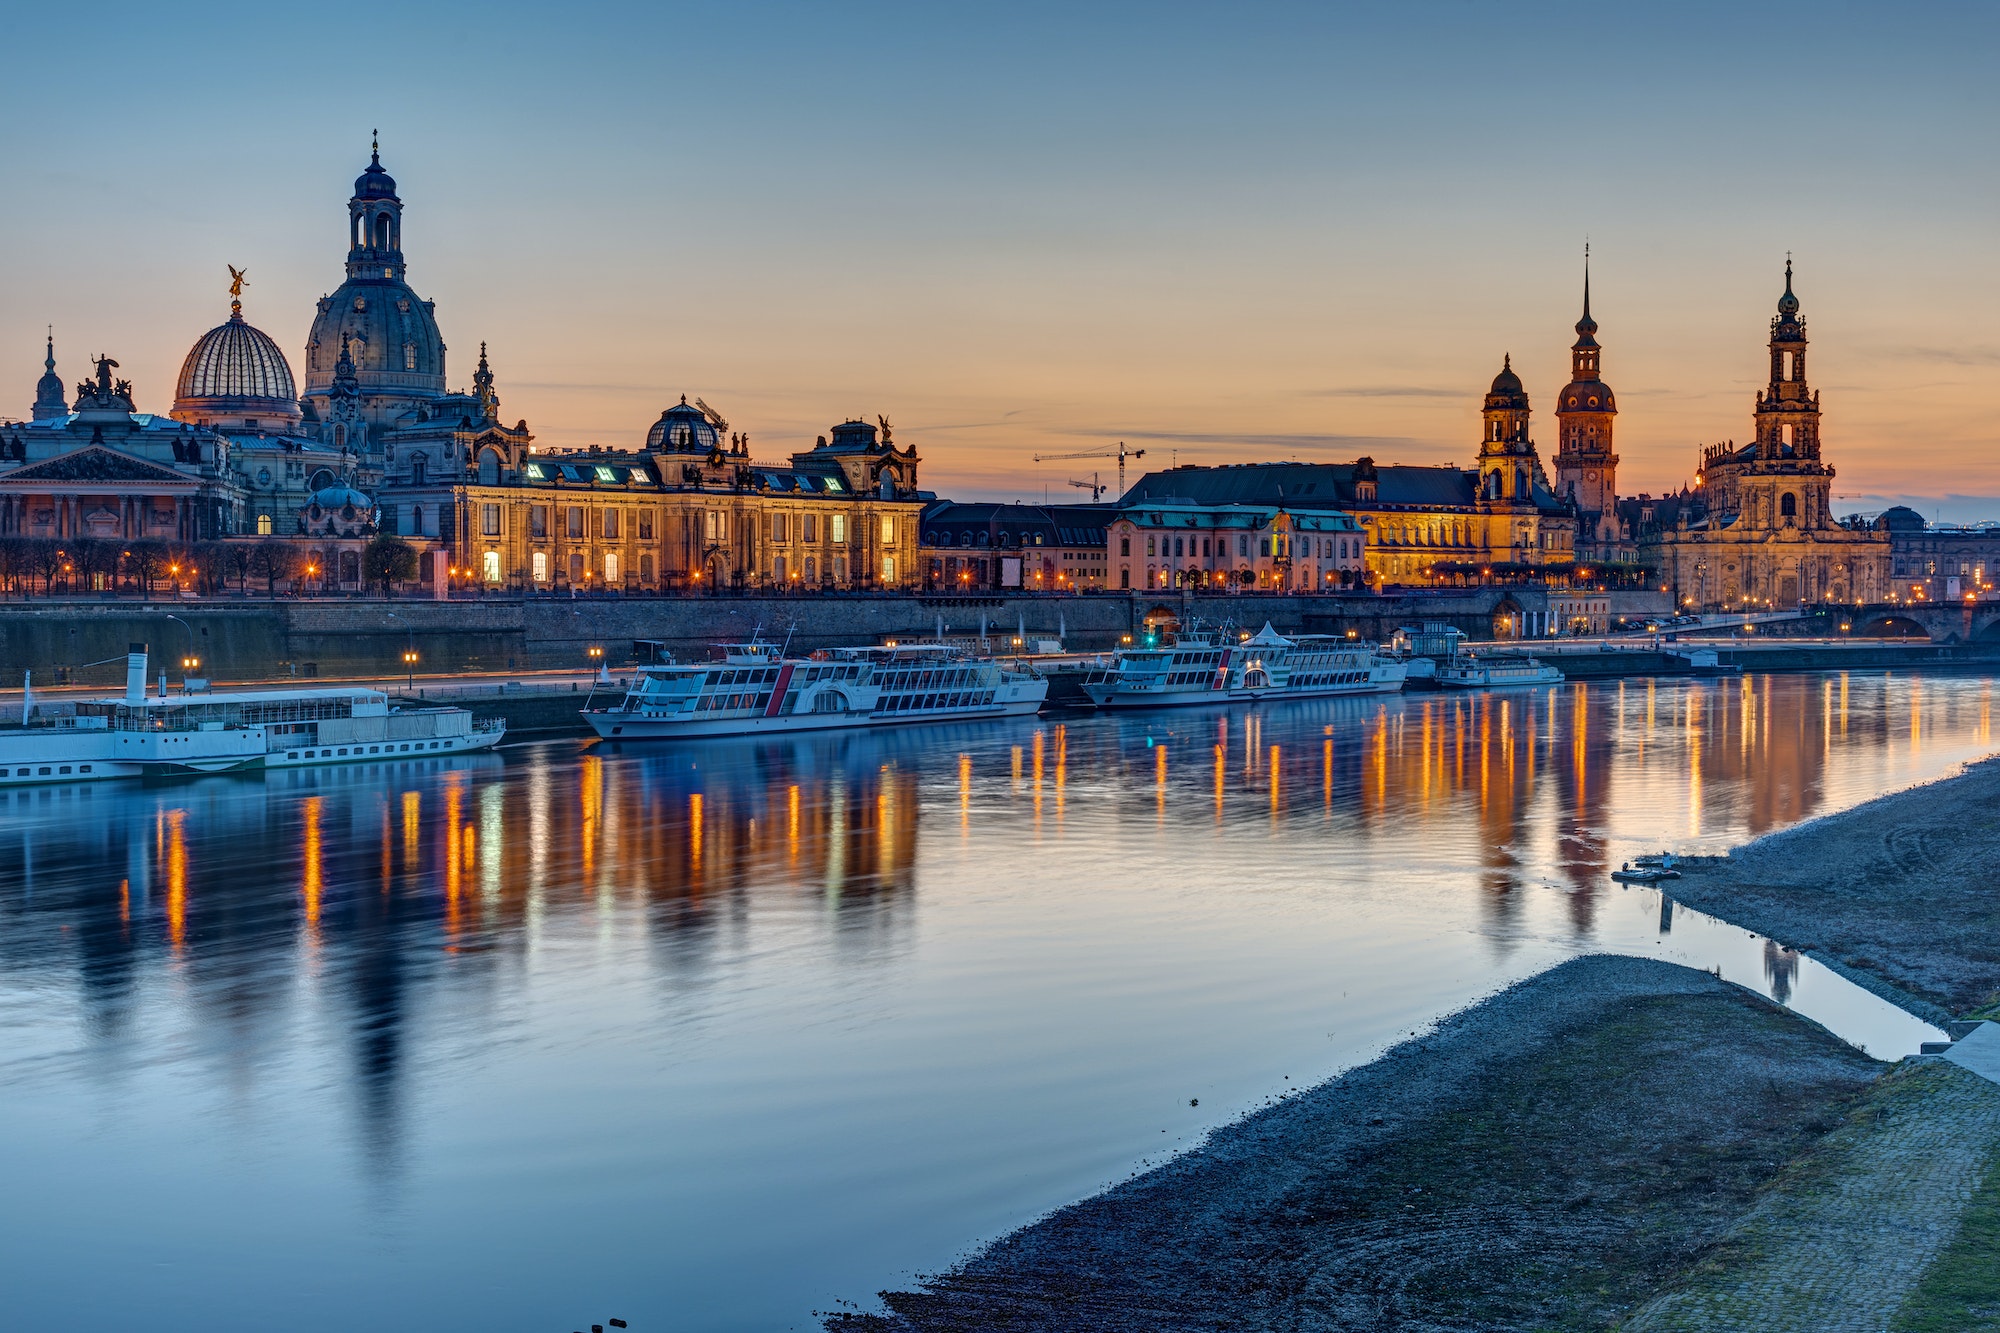 The old town of Dresden after sunset